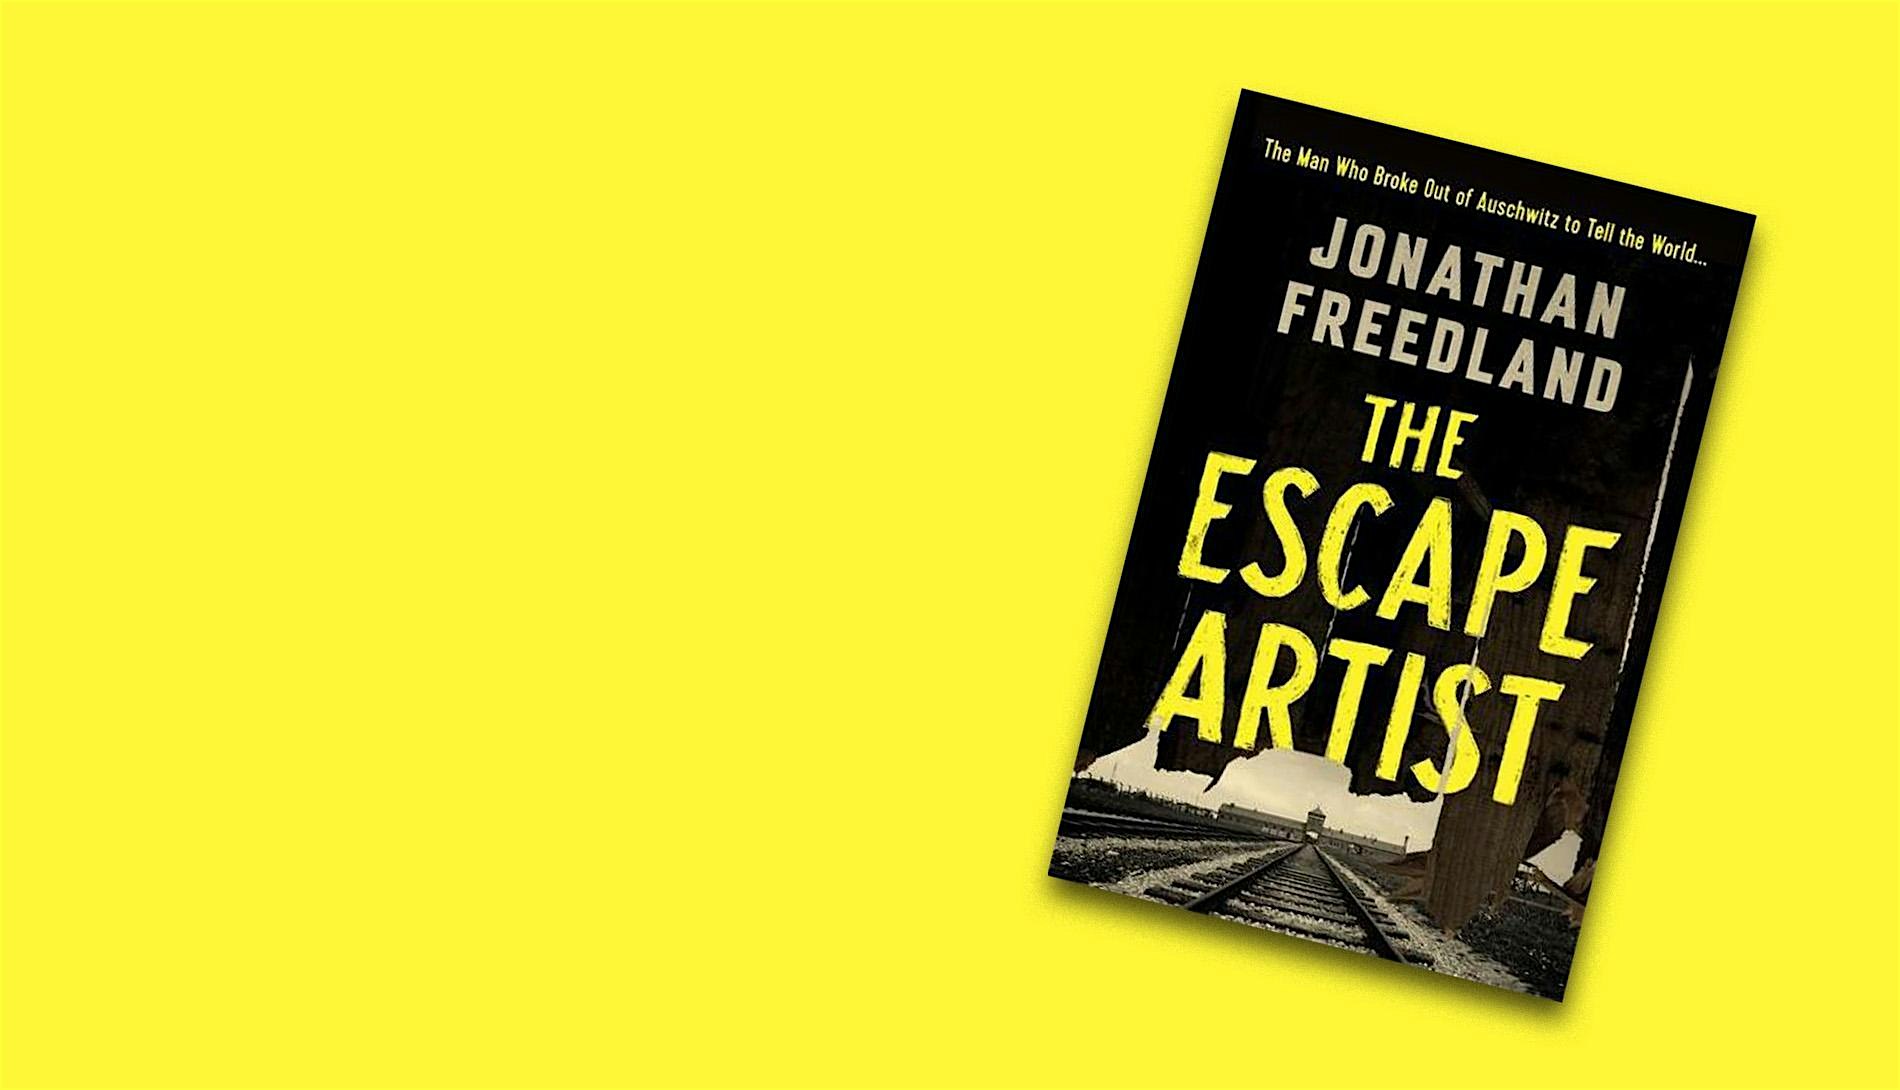 Book talk: The Escape Artist with Jonathan Freedland